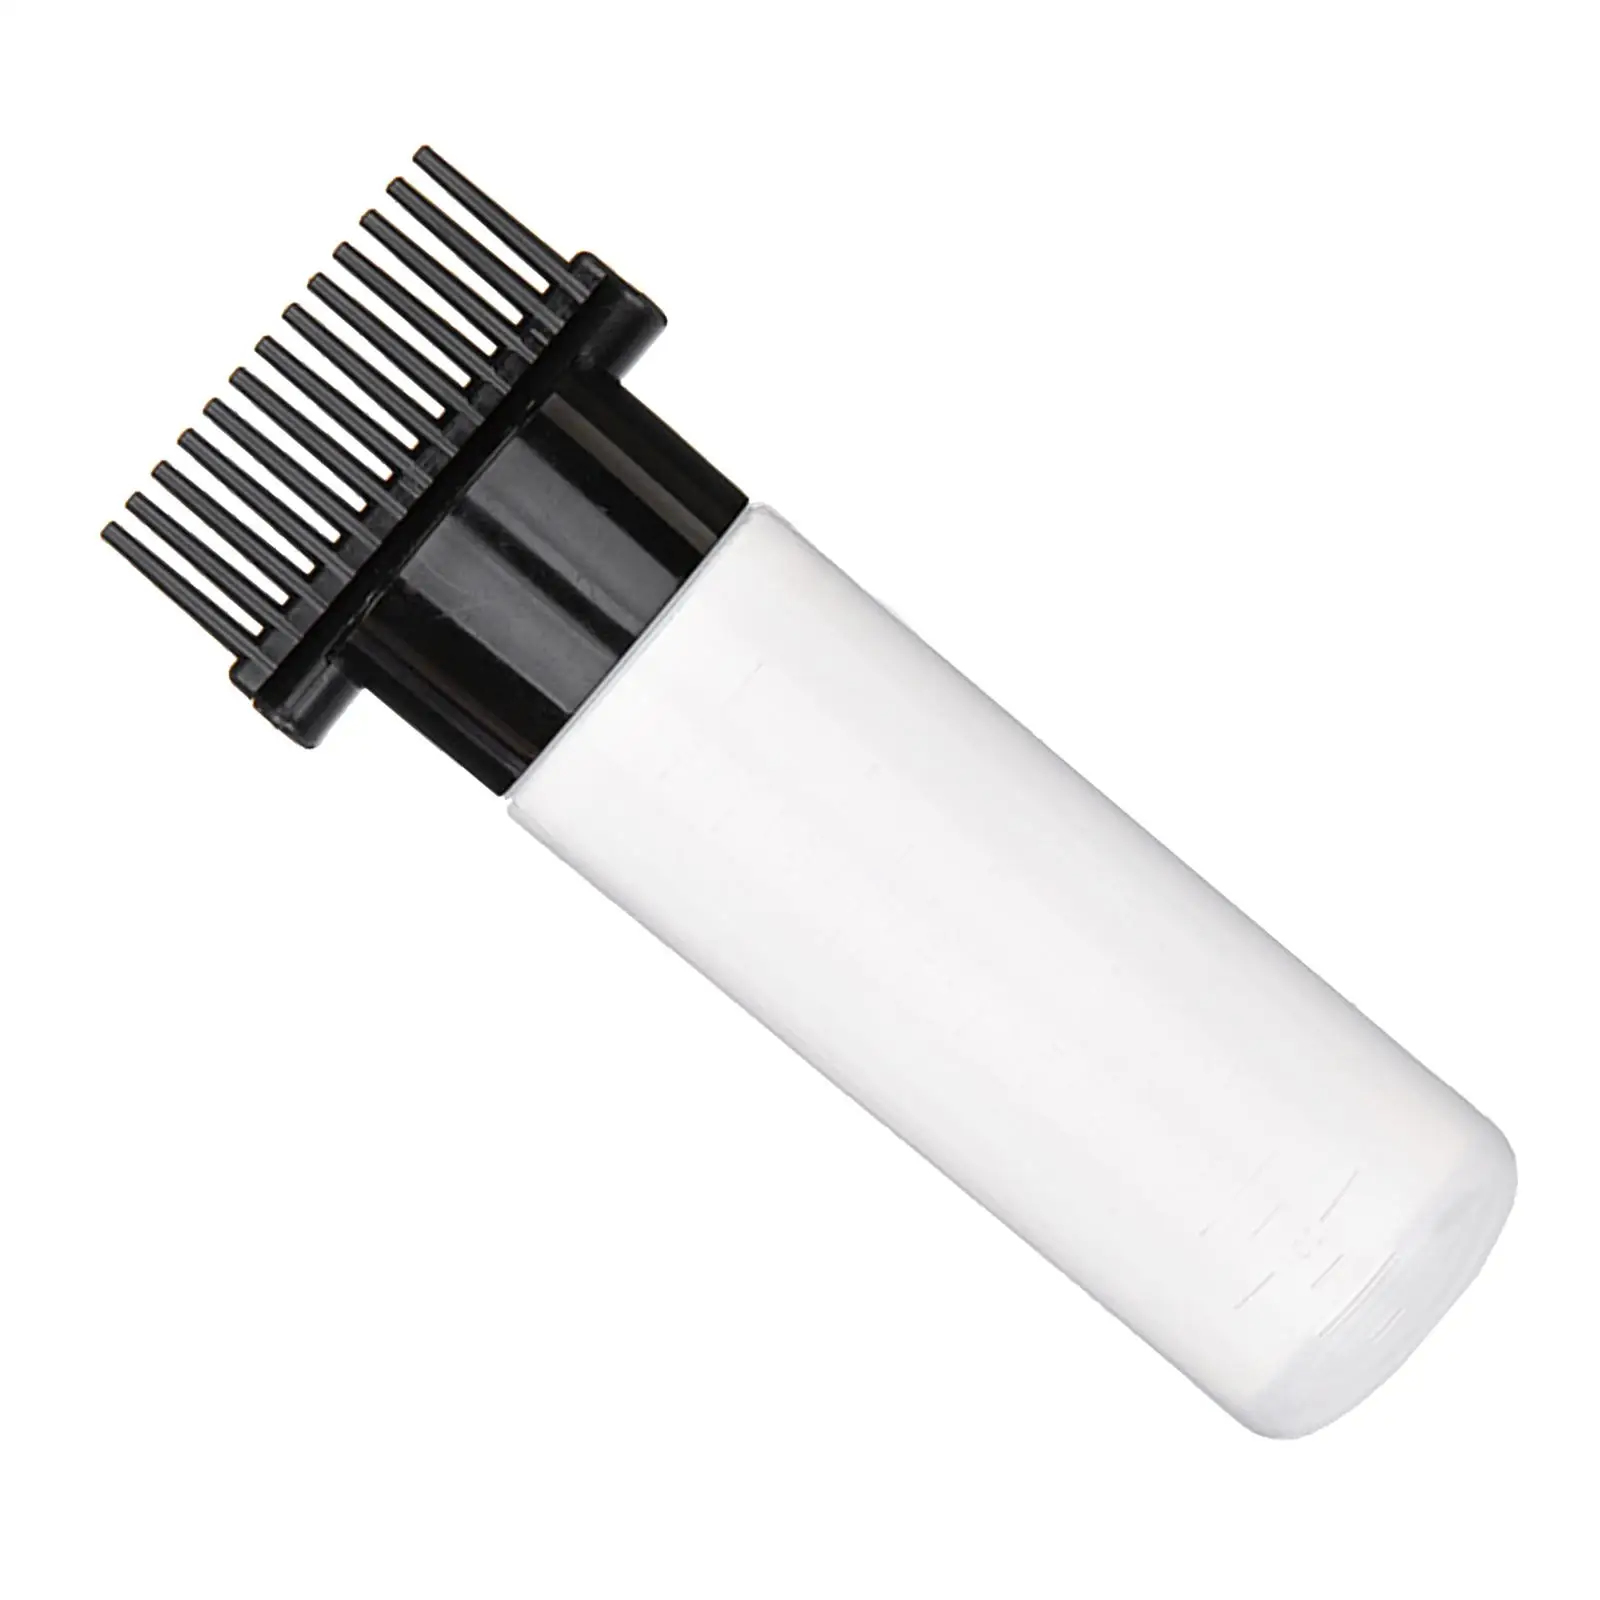 Root Comb Applicator Bottle 180ml Empty Perming Hairdressing Tool Squeeze Bottle Hair Oil Applicator for Home Salon Barbershop